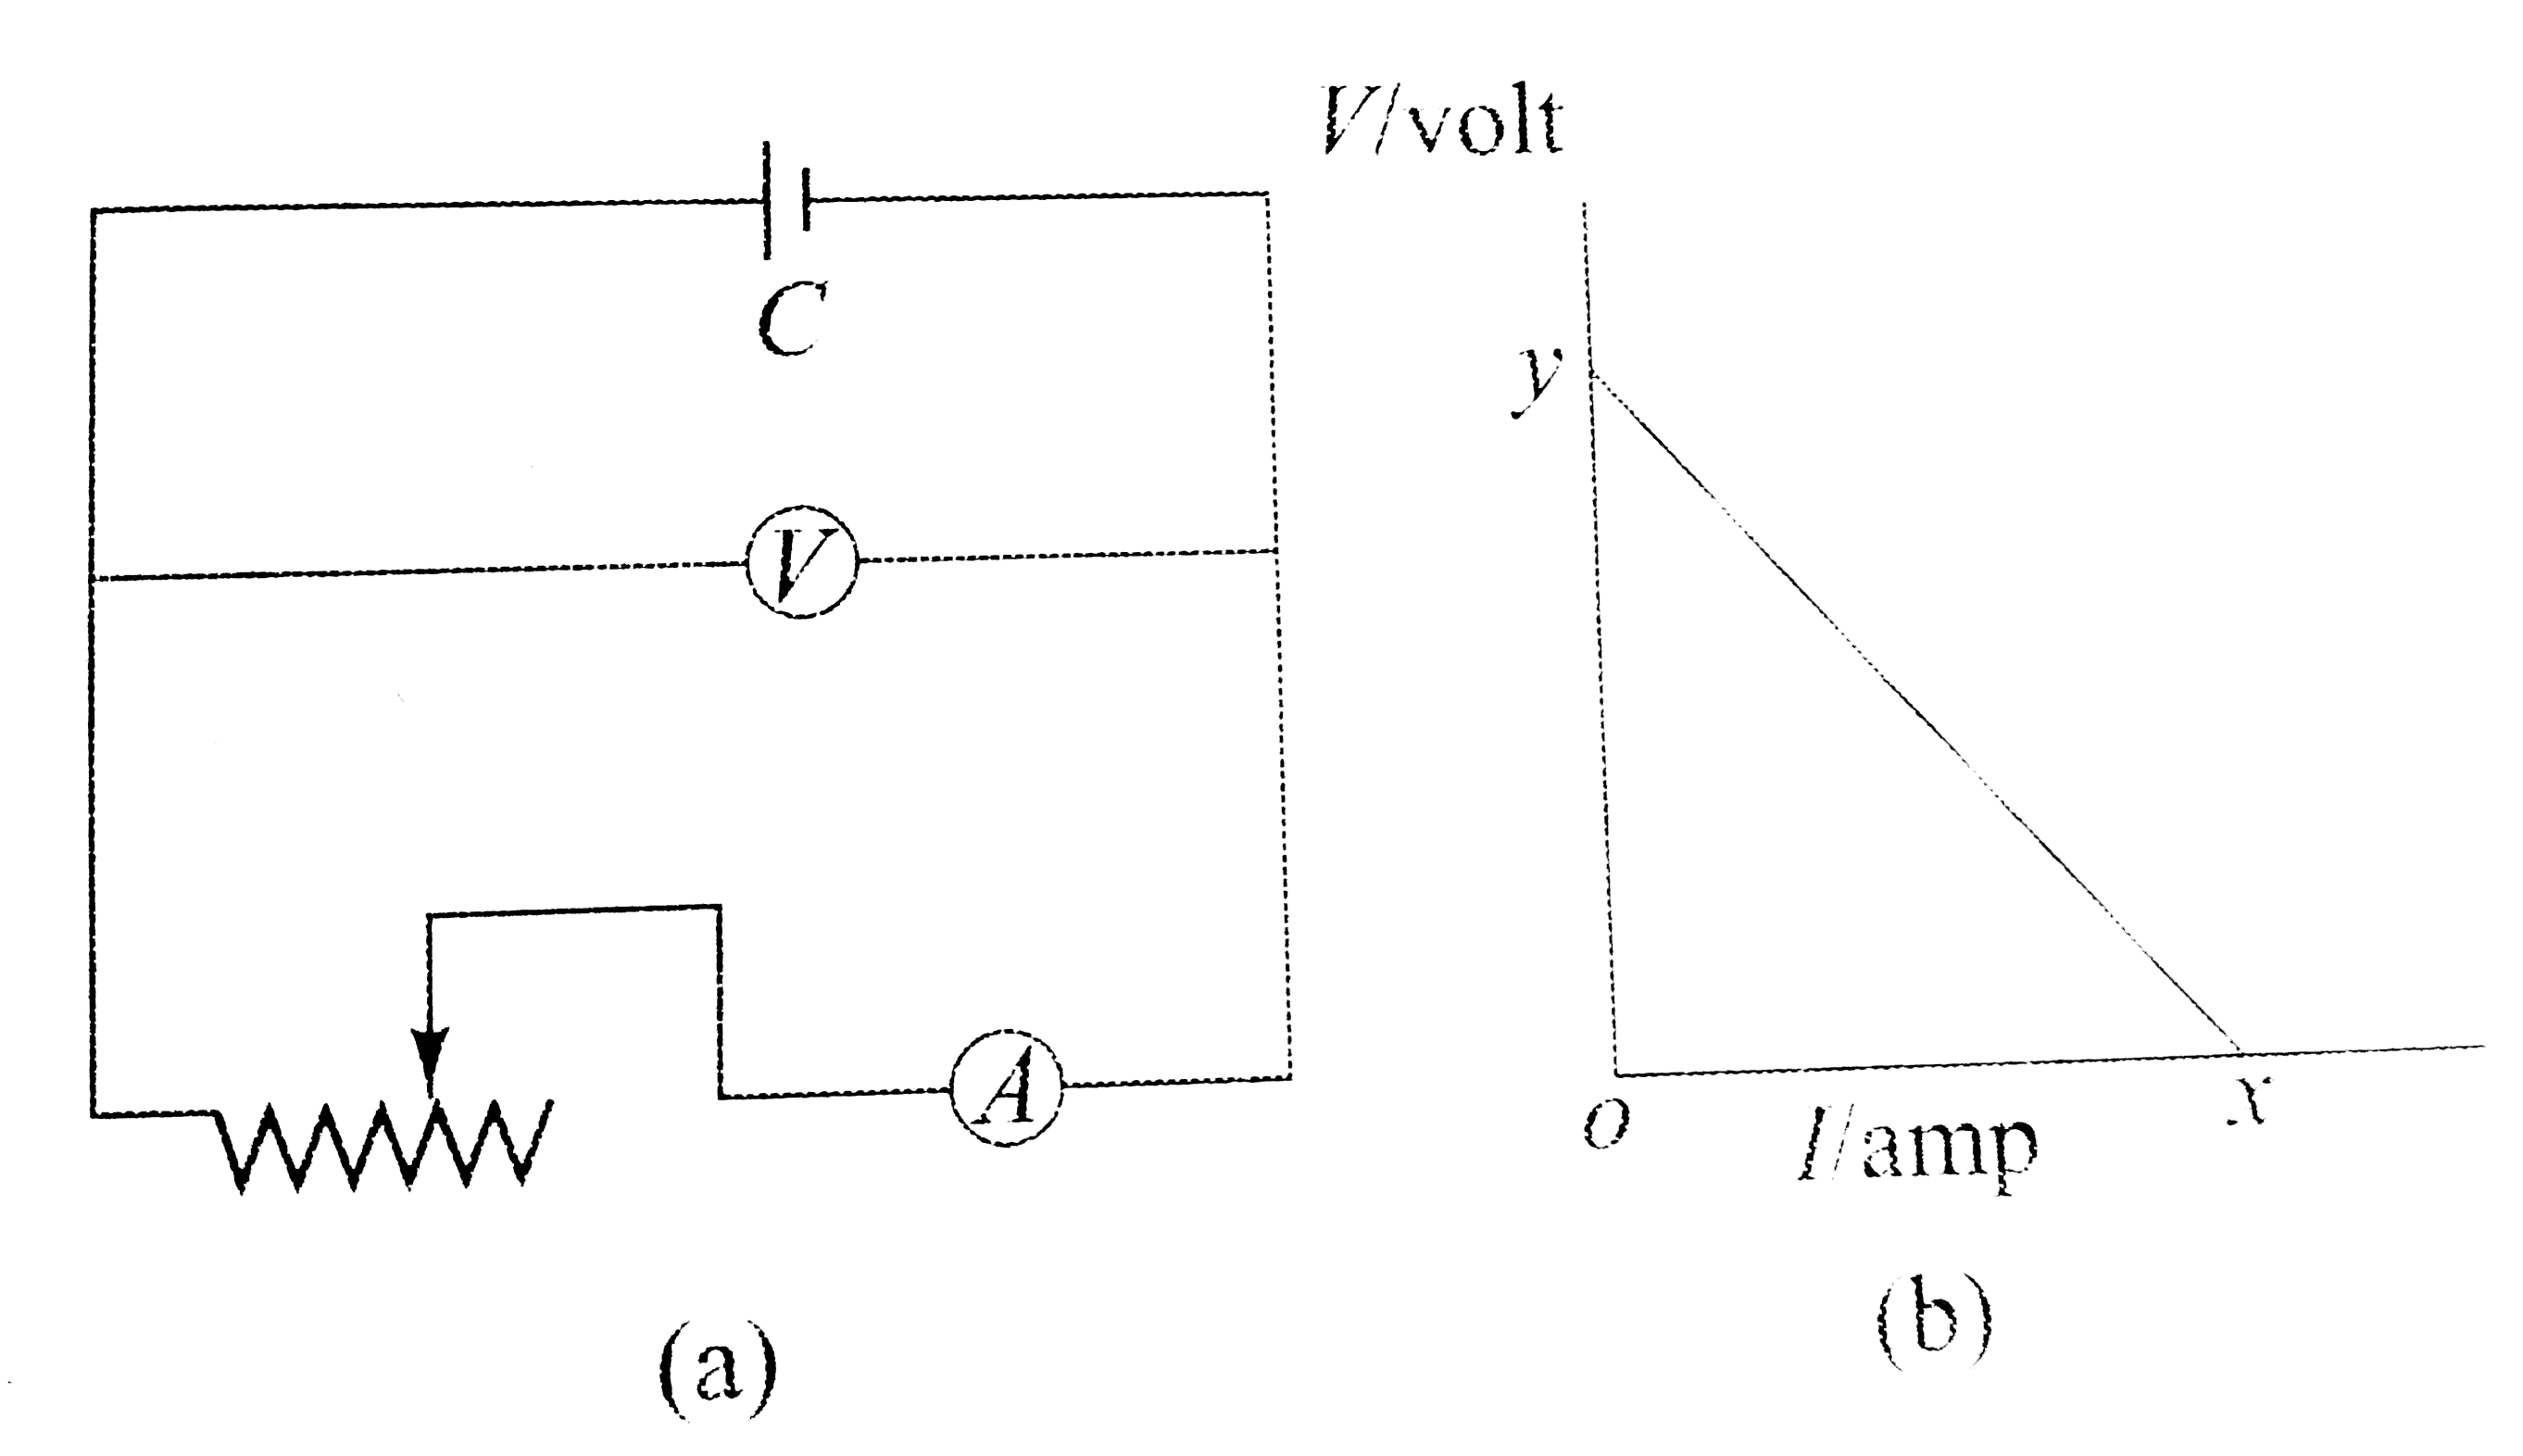 shows a circuit used in an experiment to detrmine the emf and interanl resistance of the battery C. A graph was plotted of the potential difference V between the terminals of the battery against the current I, which was varied by adjusting the rheostat. The graph is shown in x and y are the intercepts of the graph with the axes as shown. What is the internal resistance of the battery?